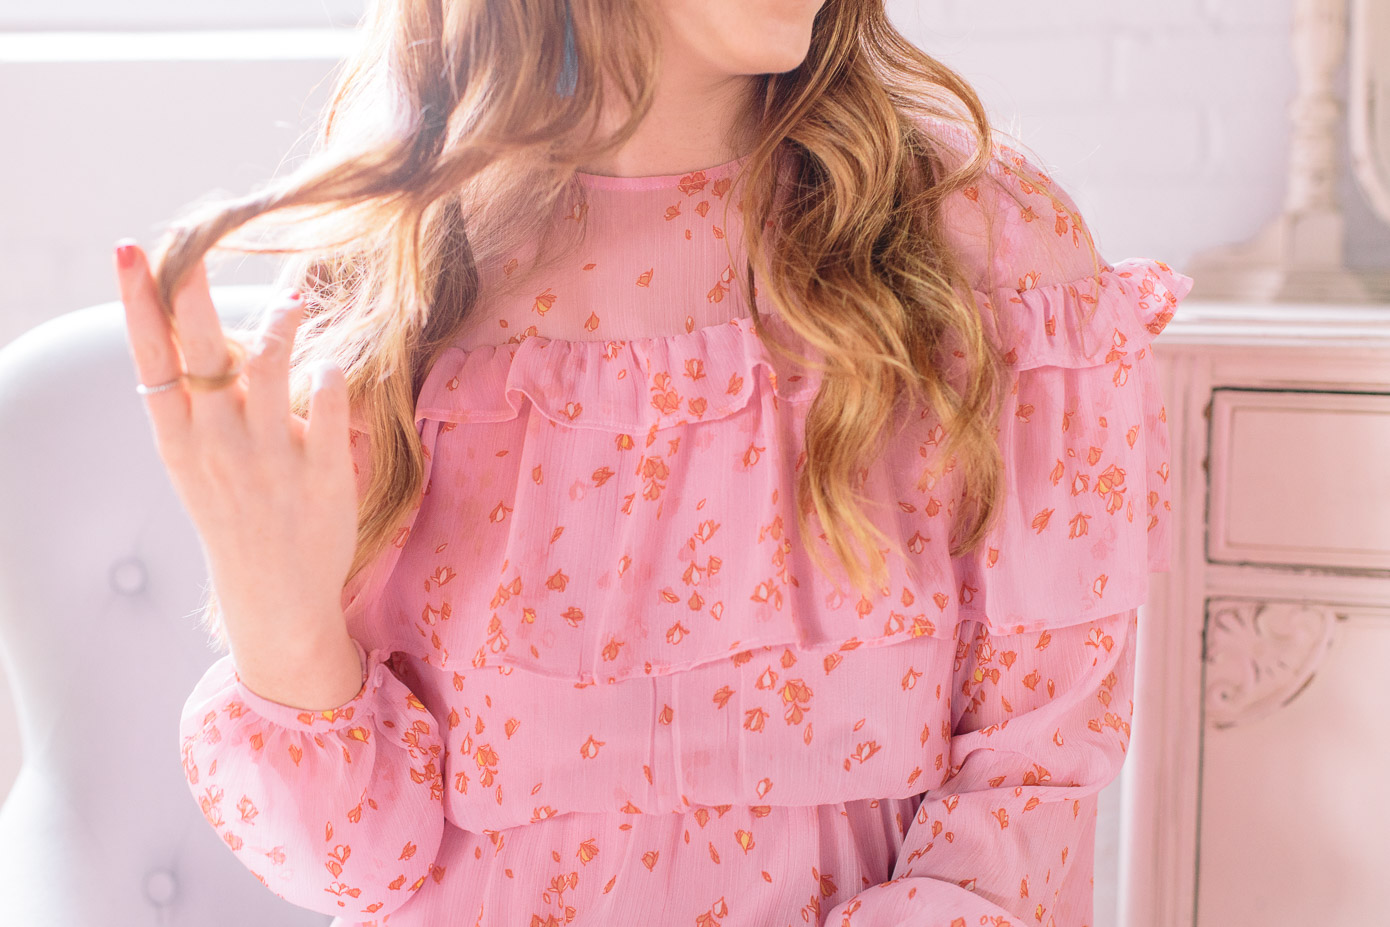 Floral Pink Chiffon Dress, Spring Dresses | Louella Reese Life & Style Blog